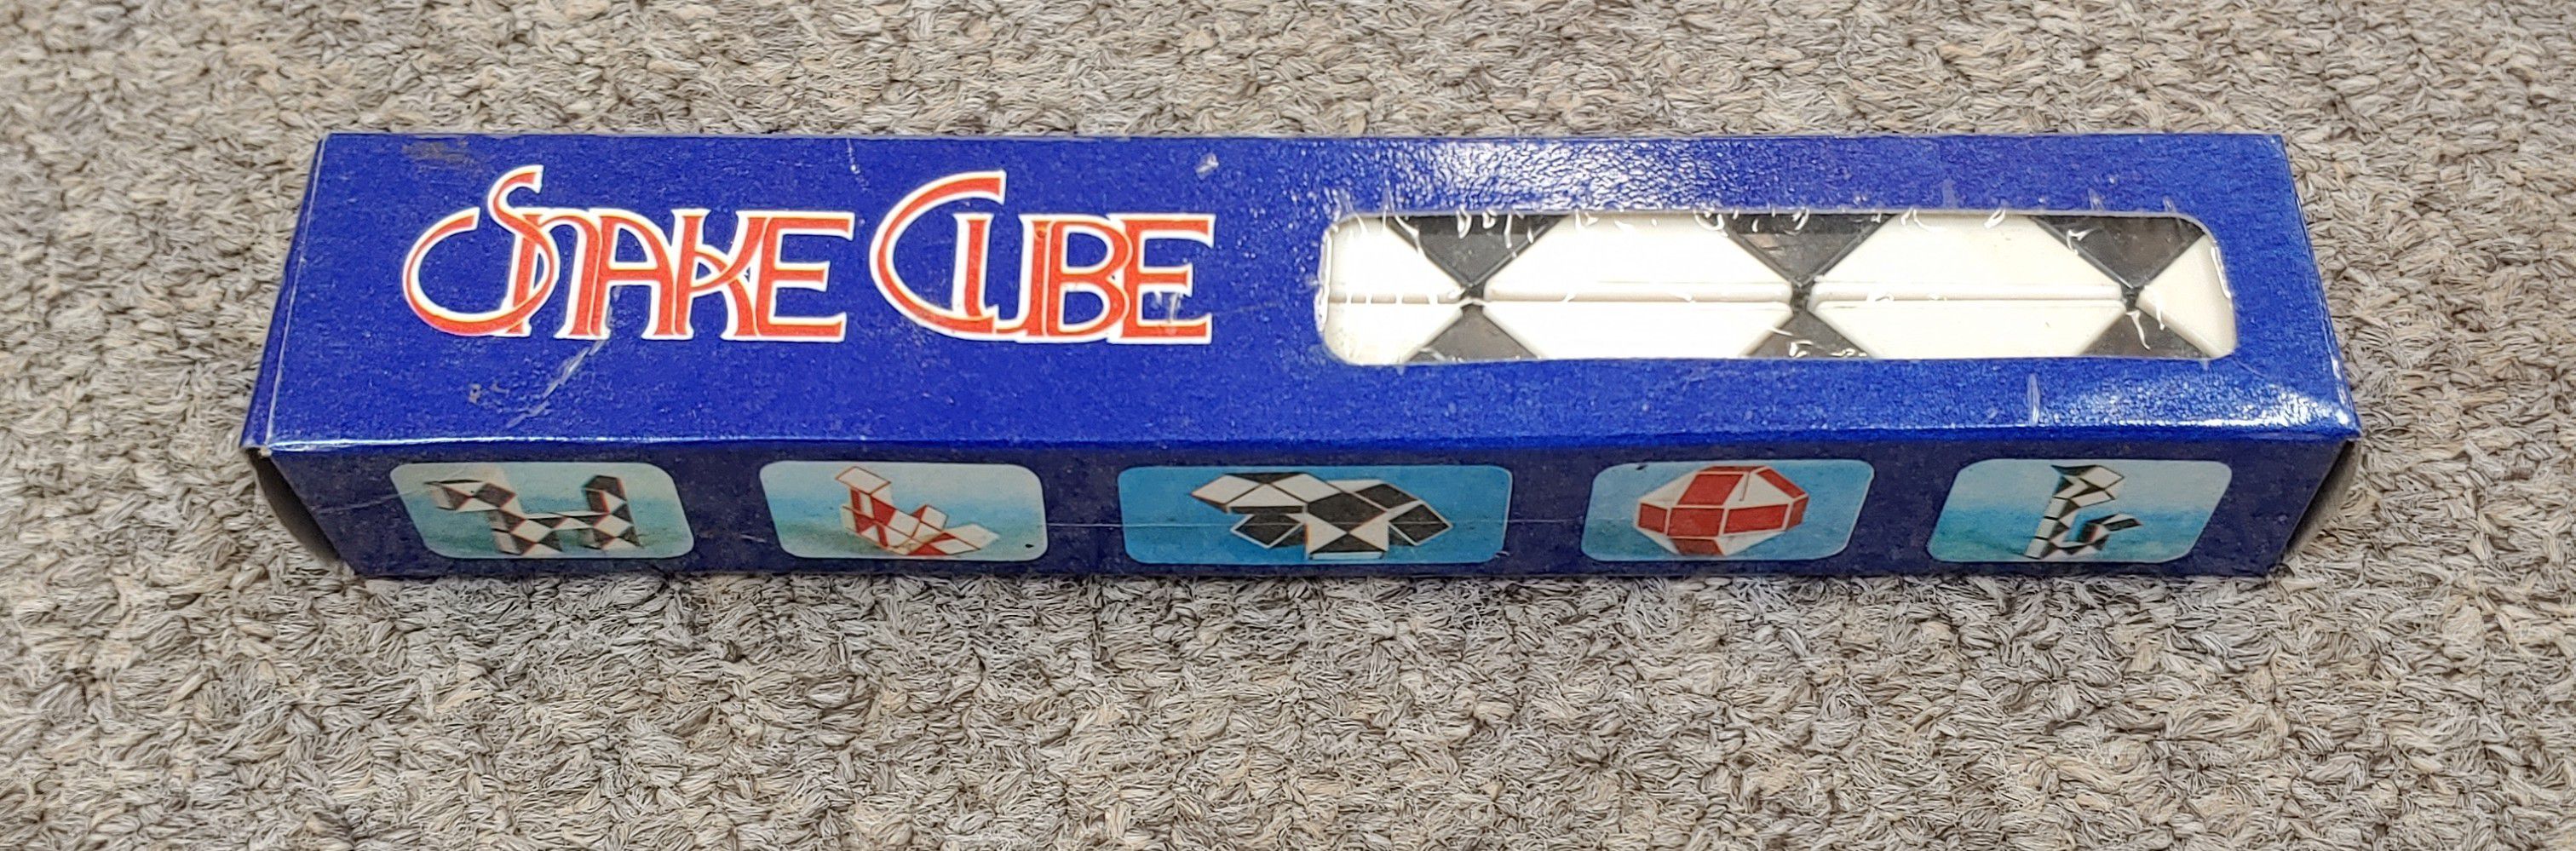 New Vintage 1980's Snake Cube Puzzle Game